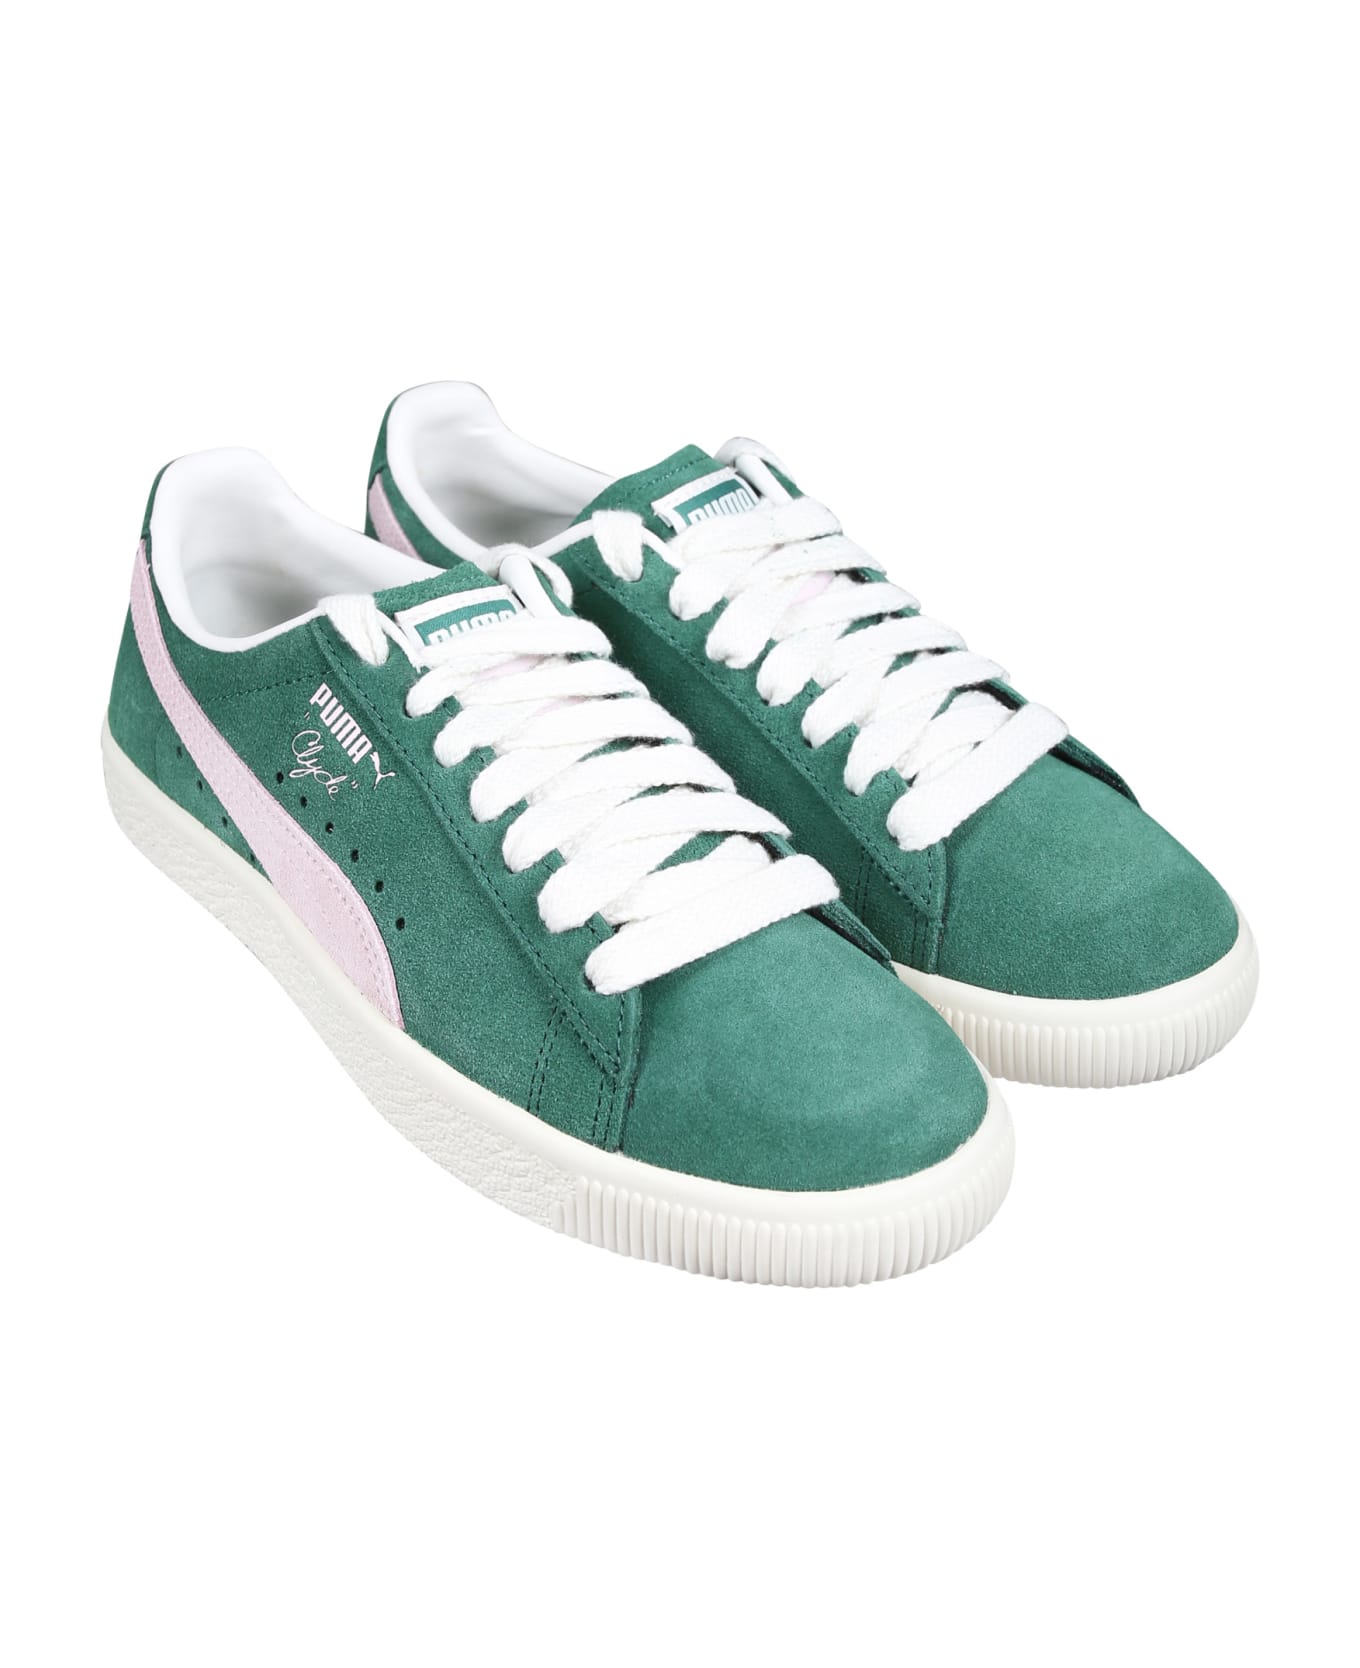 Puma Green Clyde Sneakers For Kids With Logo - Green シューズ